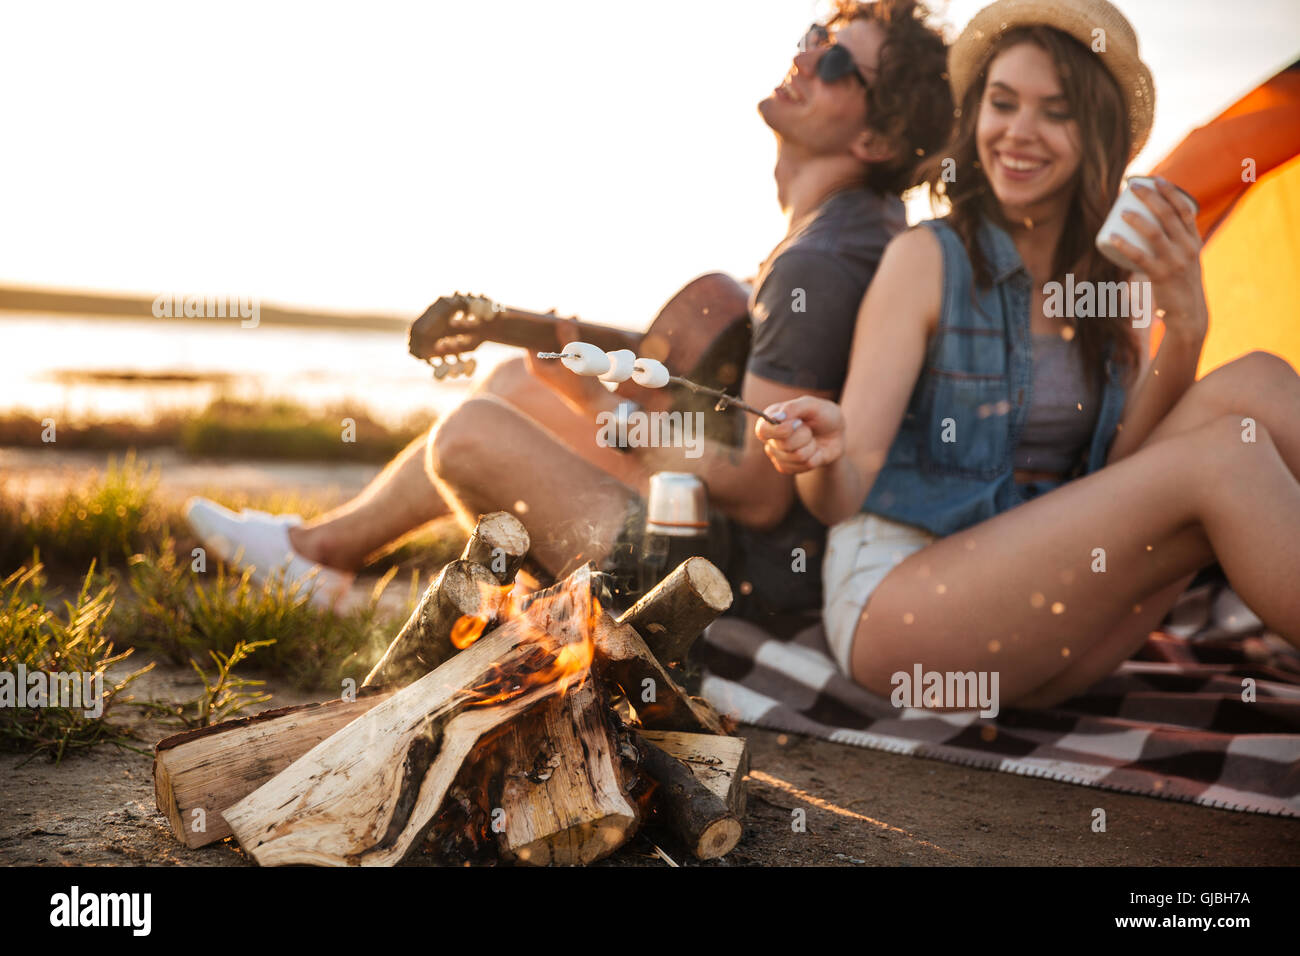 Cheerful beautiful young couple playing guitar and frying marshmallows on bonfire Stock Photo